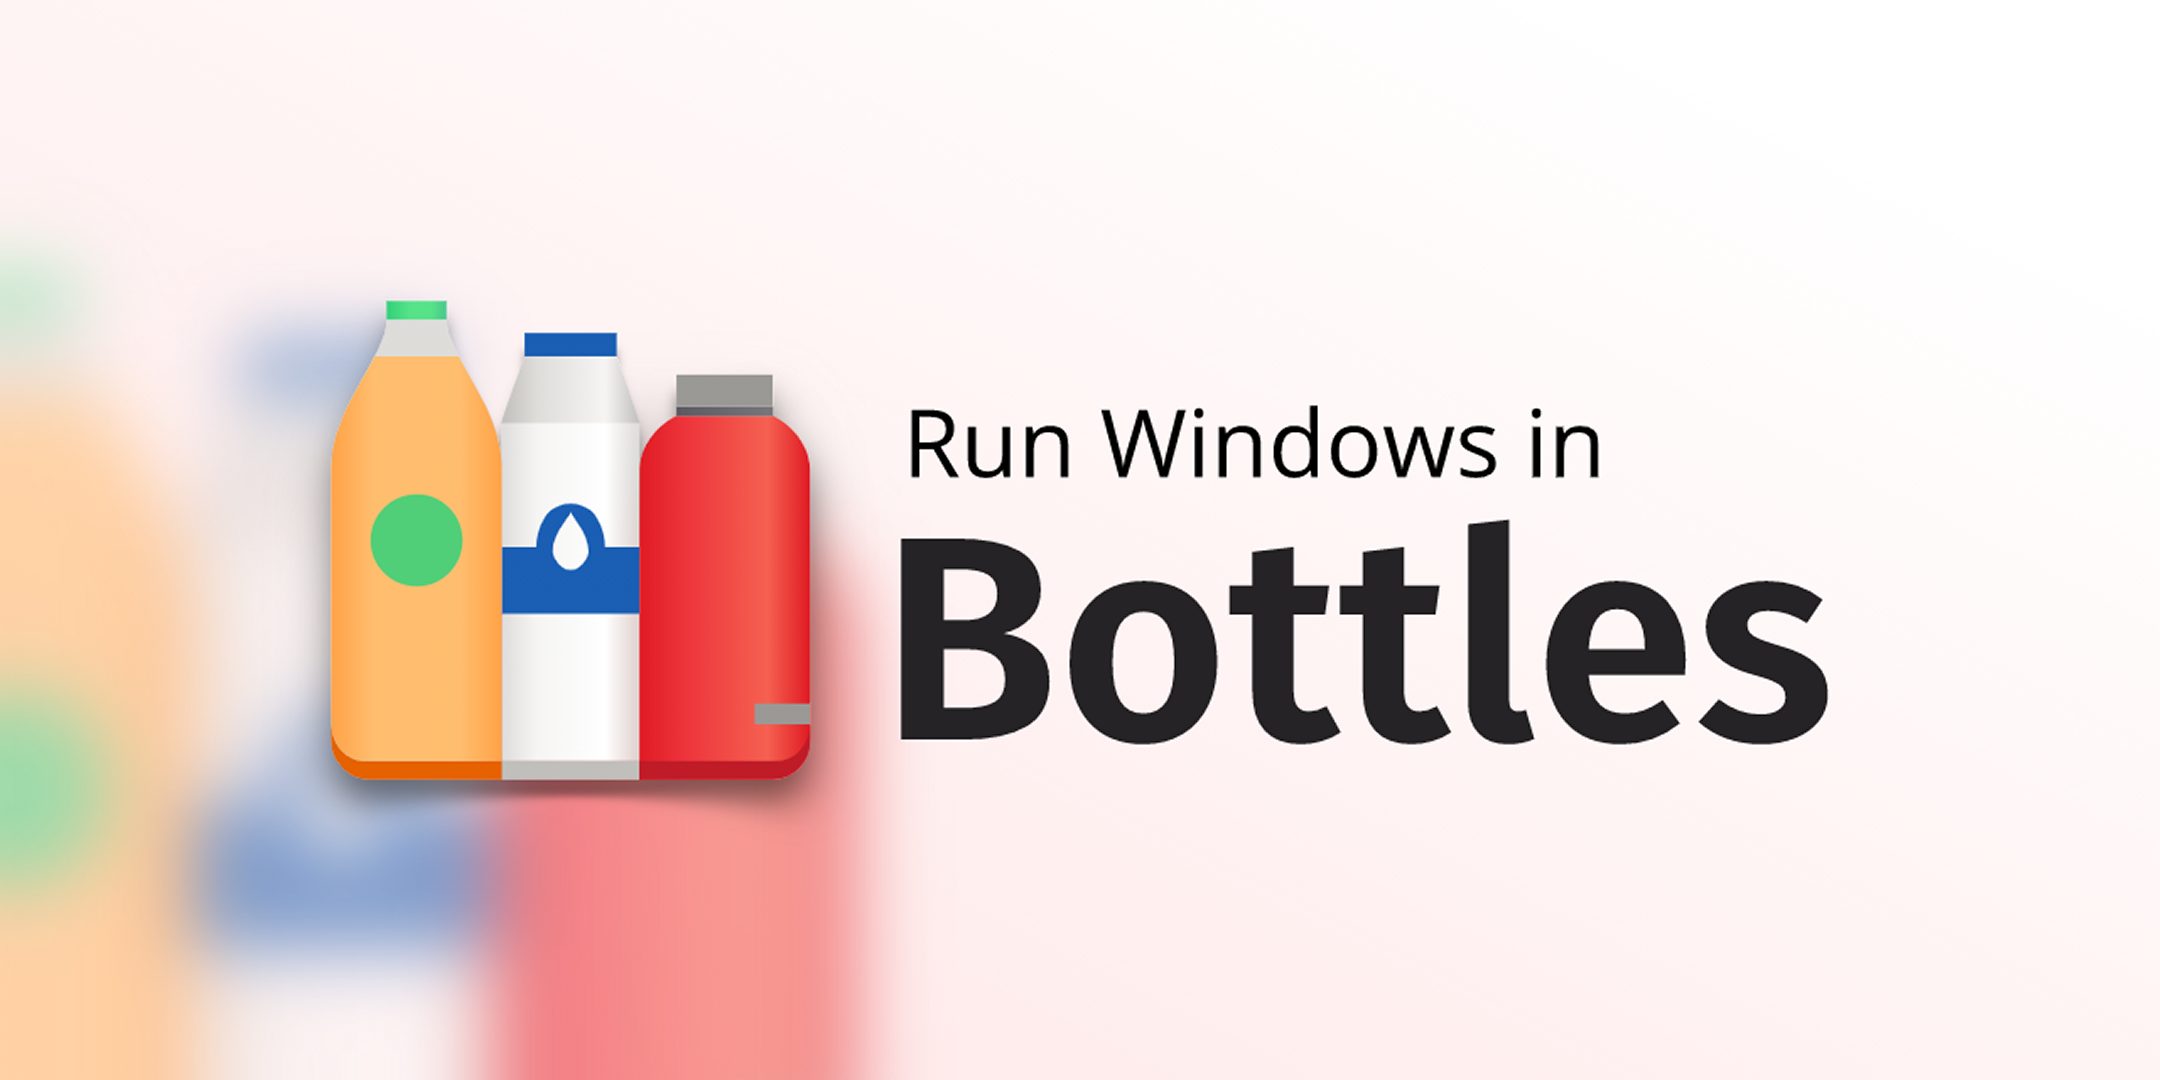 Run Windows applications on Linux in a bottle, with Bottles